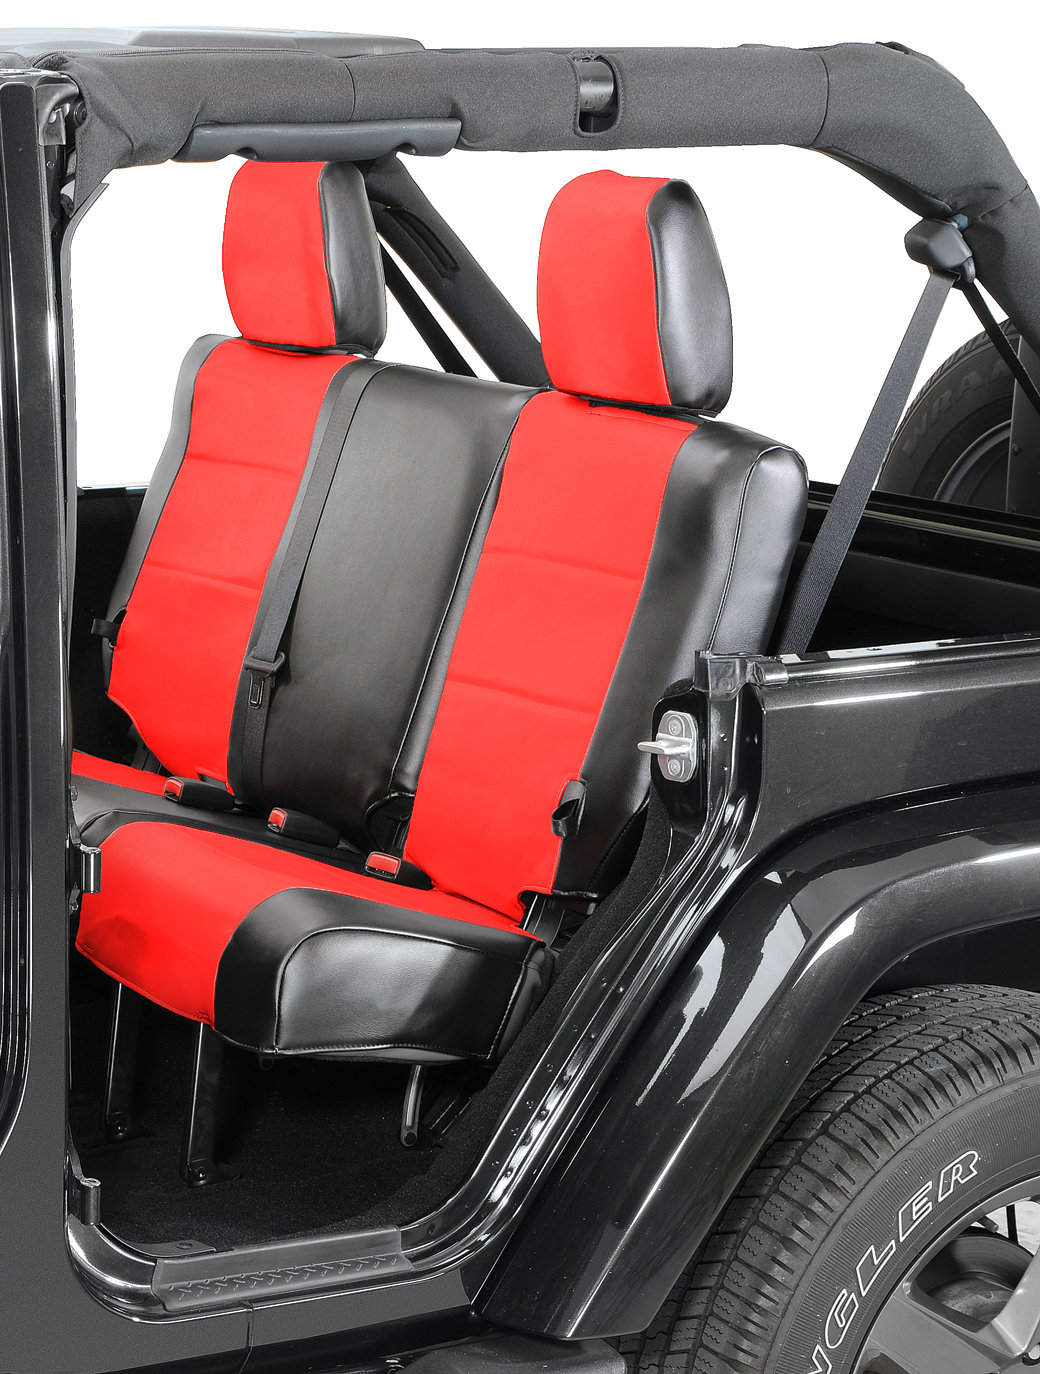 Coverking Rear Leatherette Seat Covers For 2007 Jeep Wrangler Unlimited Jk 4 Door